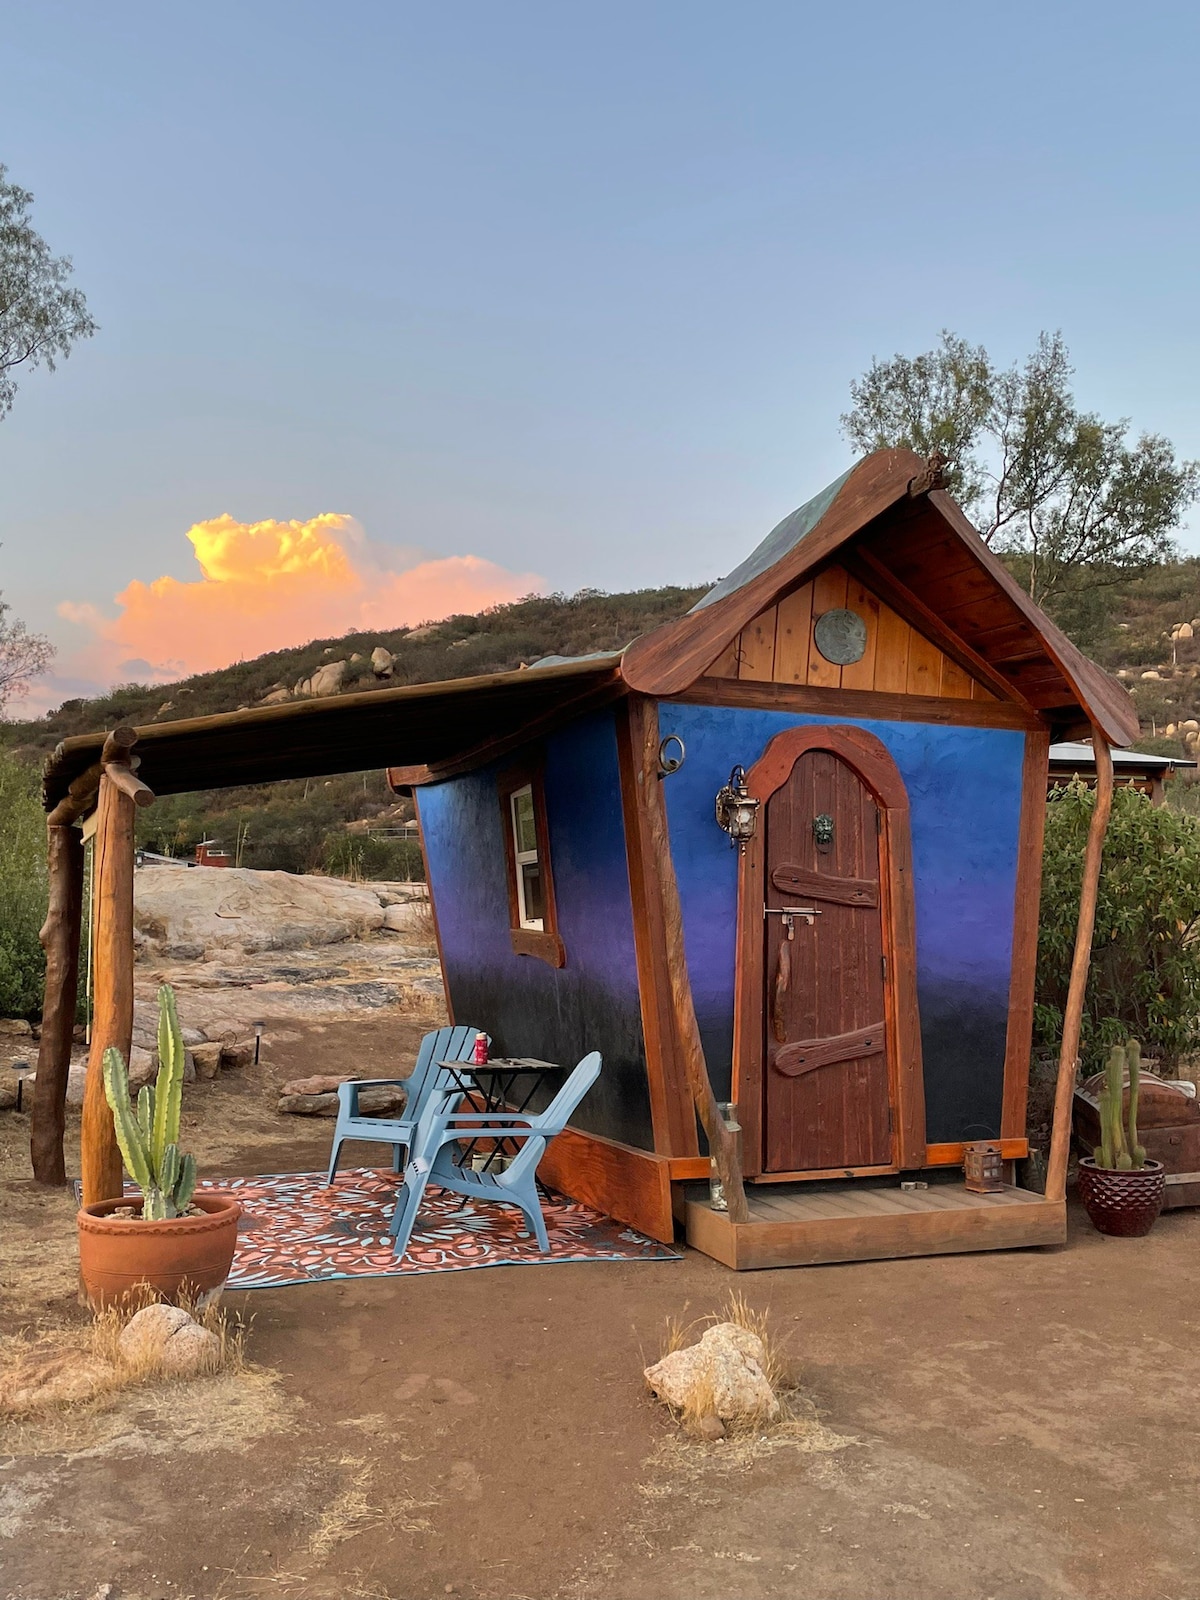 The Magical Mountain Tiny House at Hooper Hollow